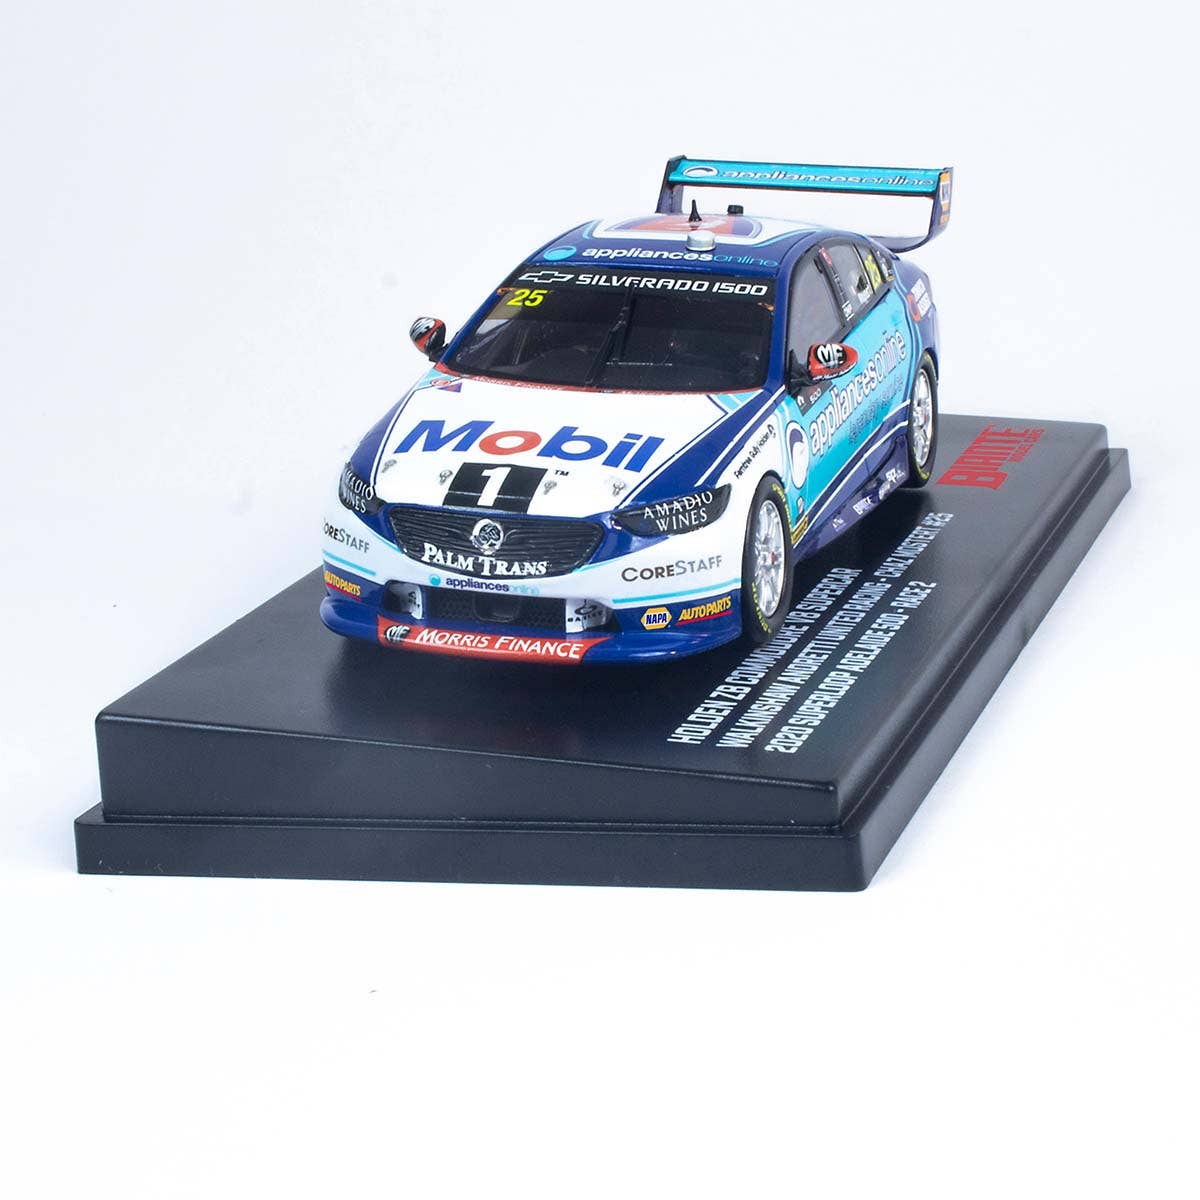 Holden ZB Commodore - Mobil 1 Appliances Online Racing - #25, C.Mostert - 2nd place, Race 2, Superloop Adelaide 500 - Diecast Model Car